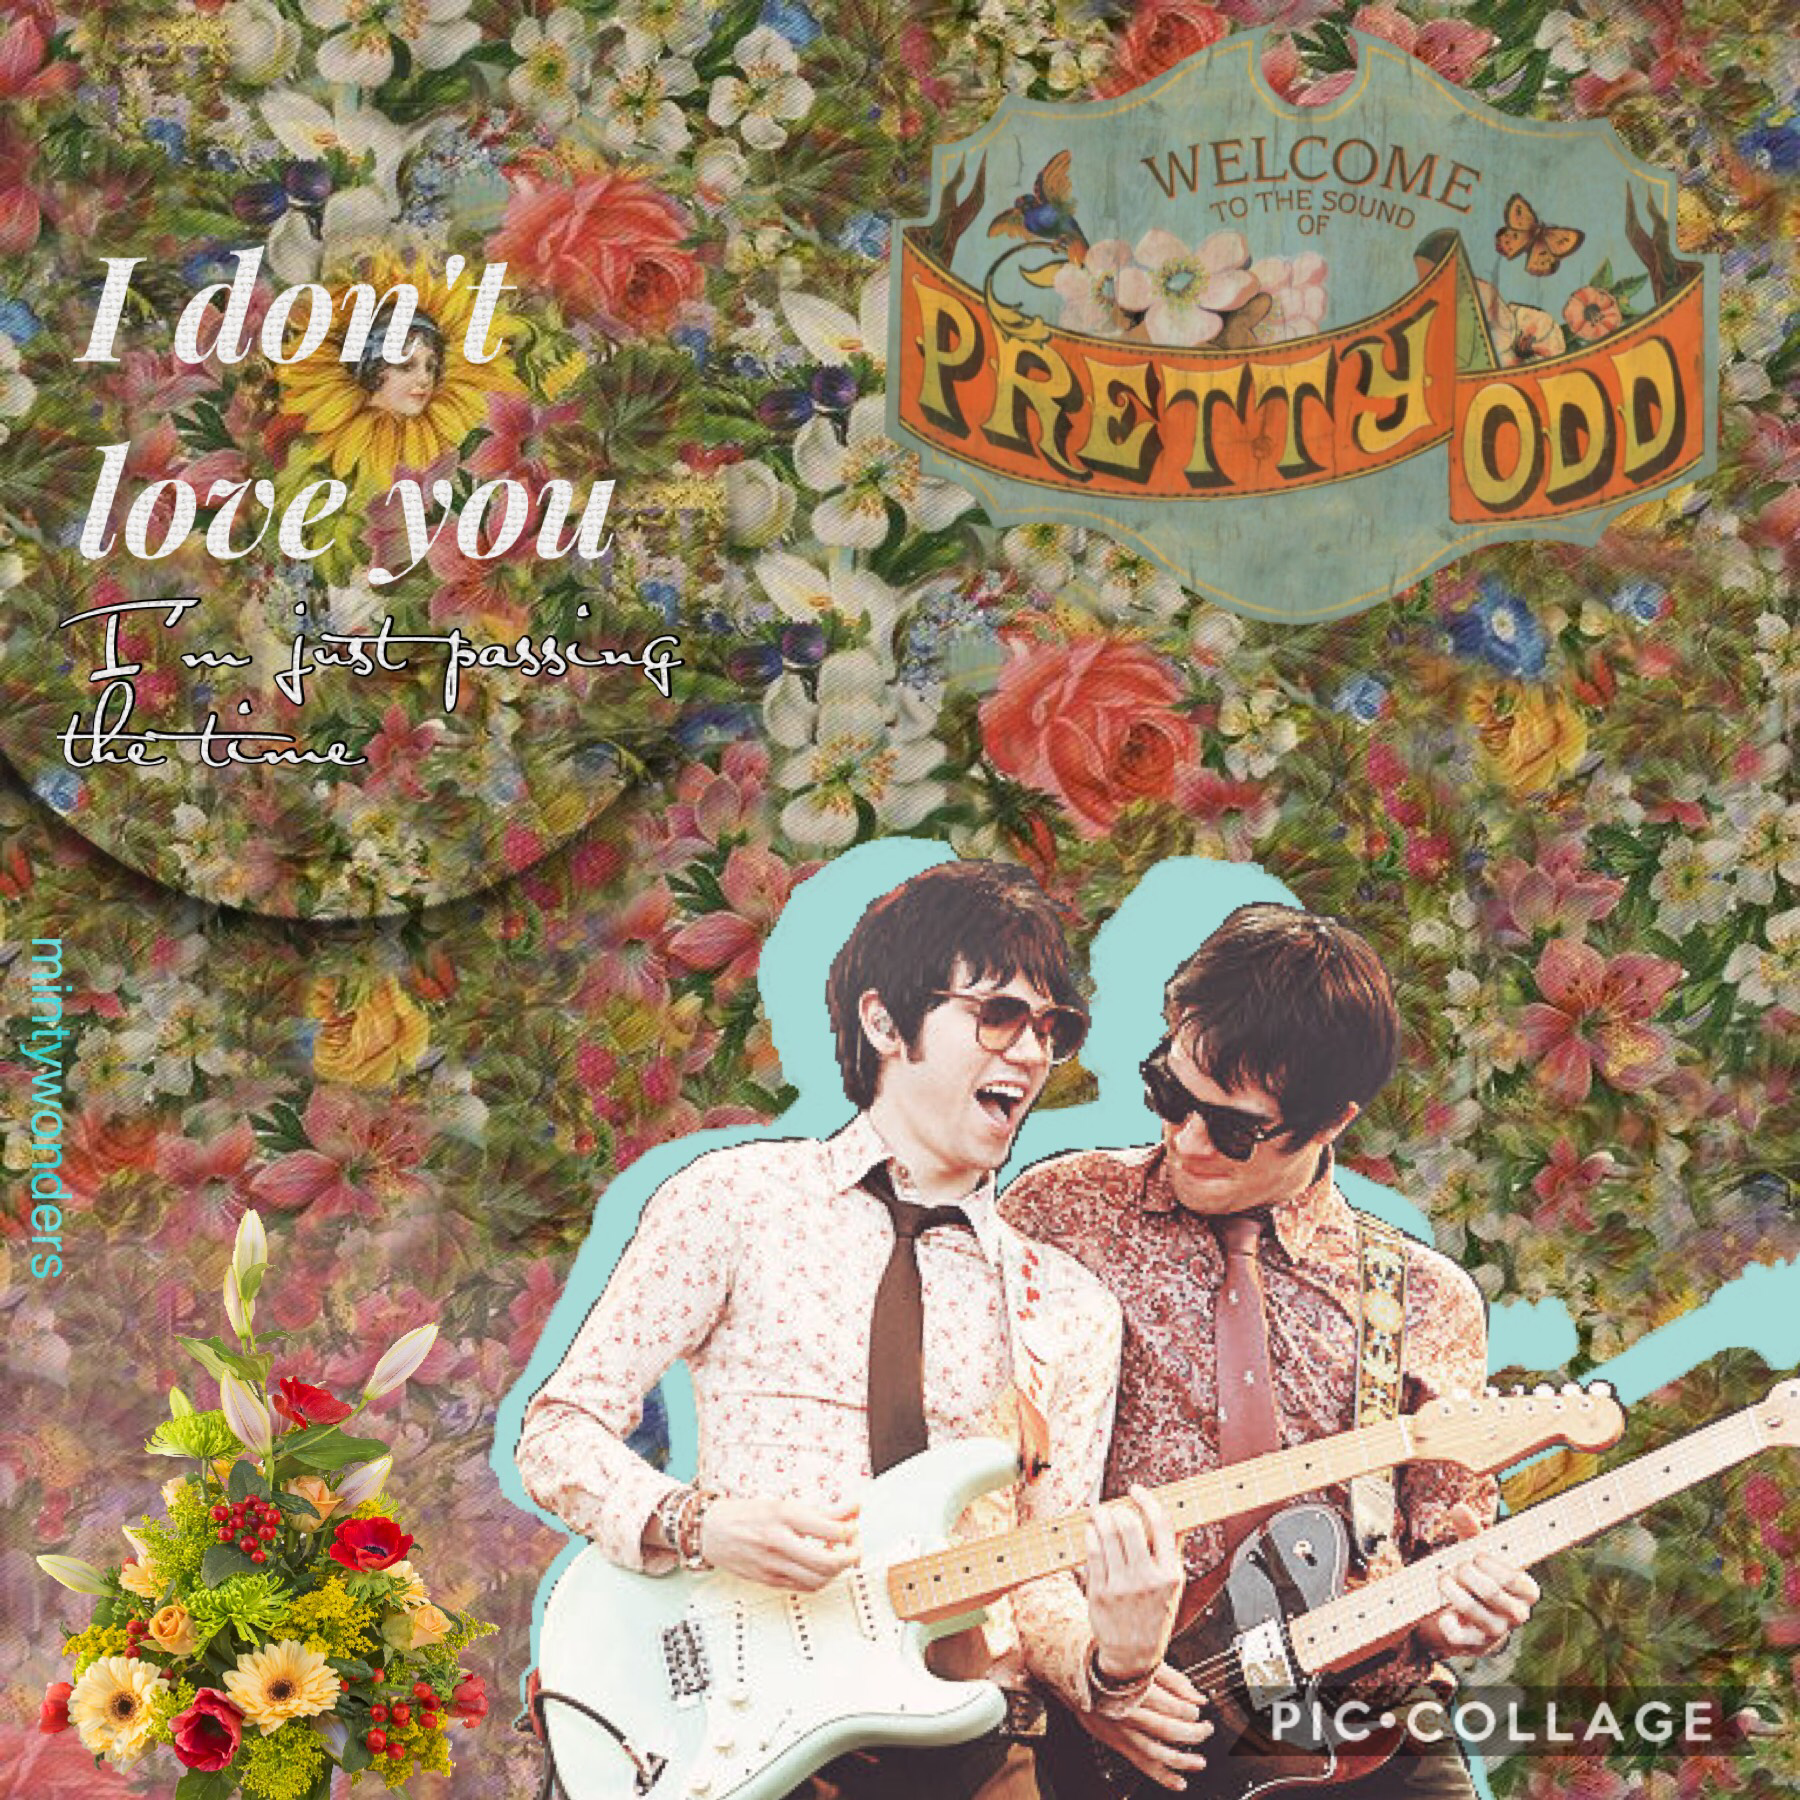 Sorry for this terrible edit, but it's one of me fave songs currently.